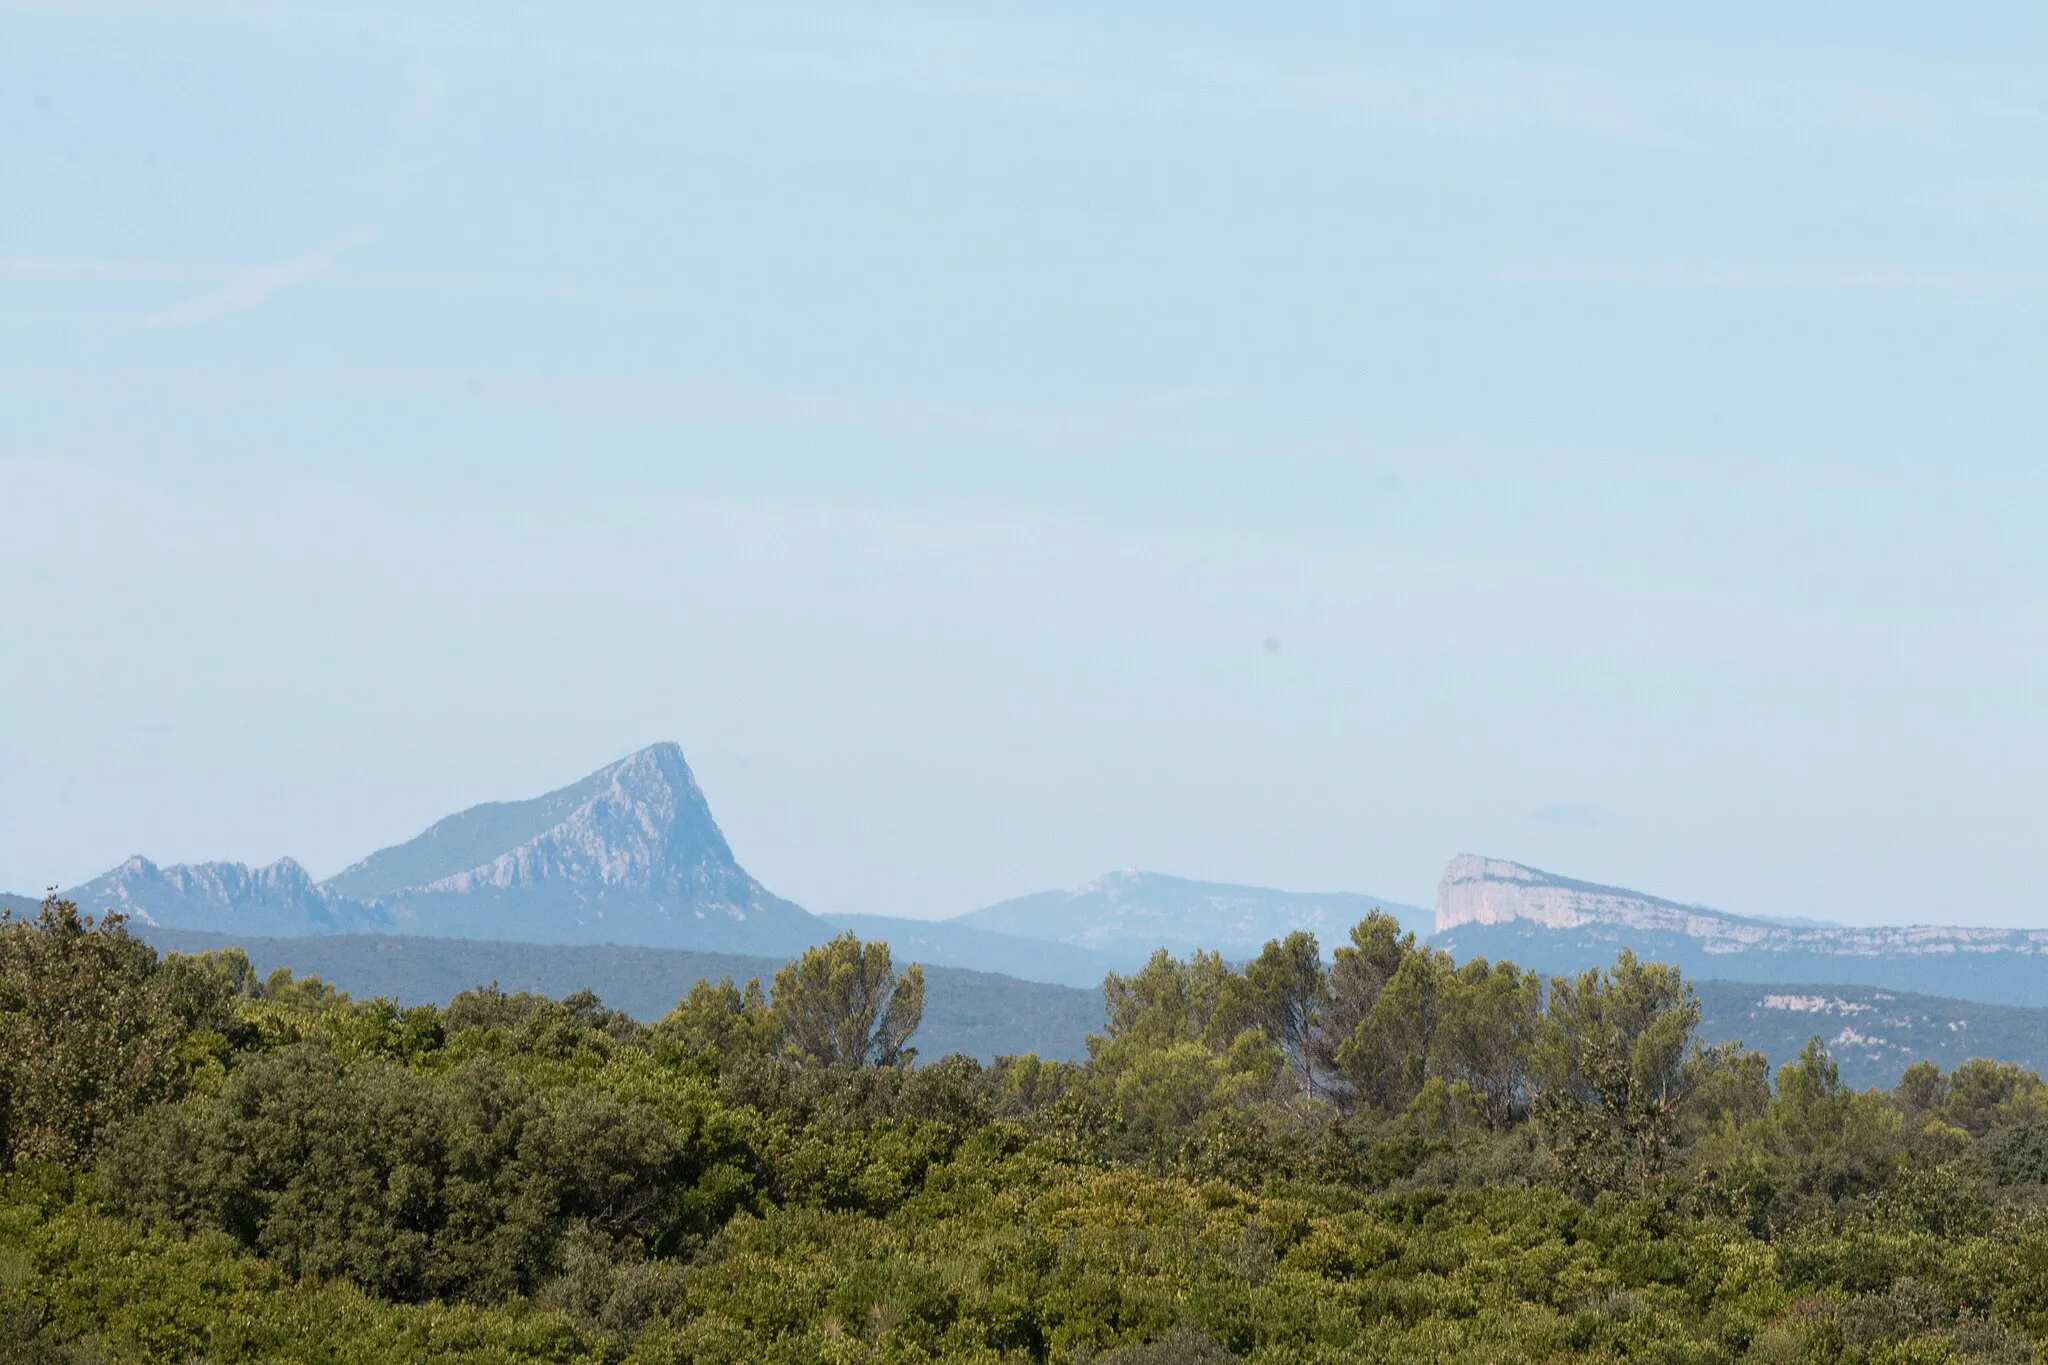 Photo showing: The Pic Saint-Loup seen from the road to Montpezat.